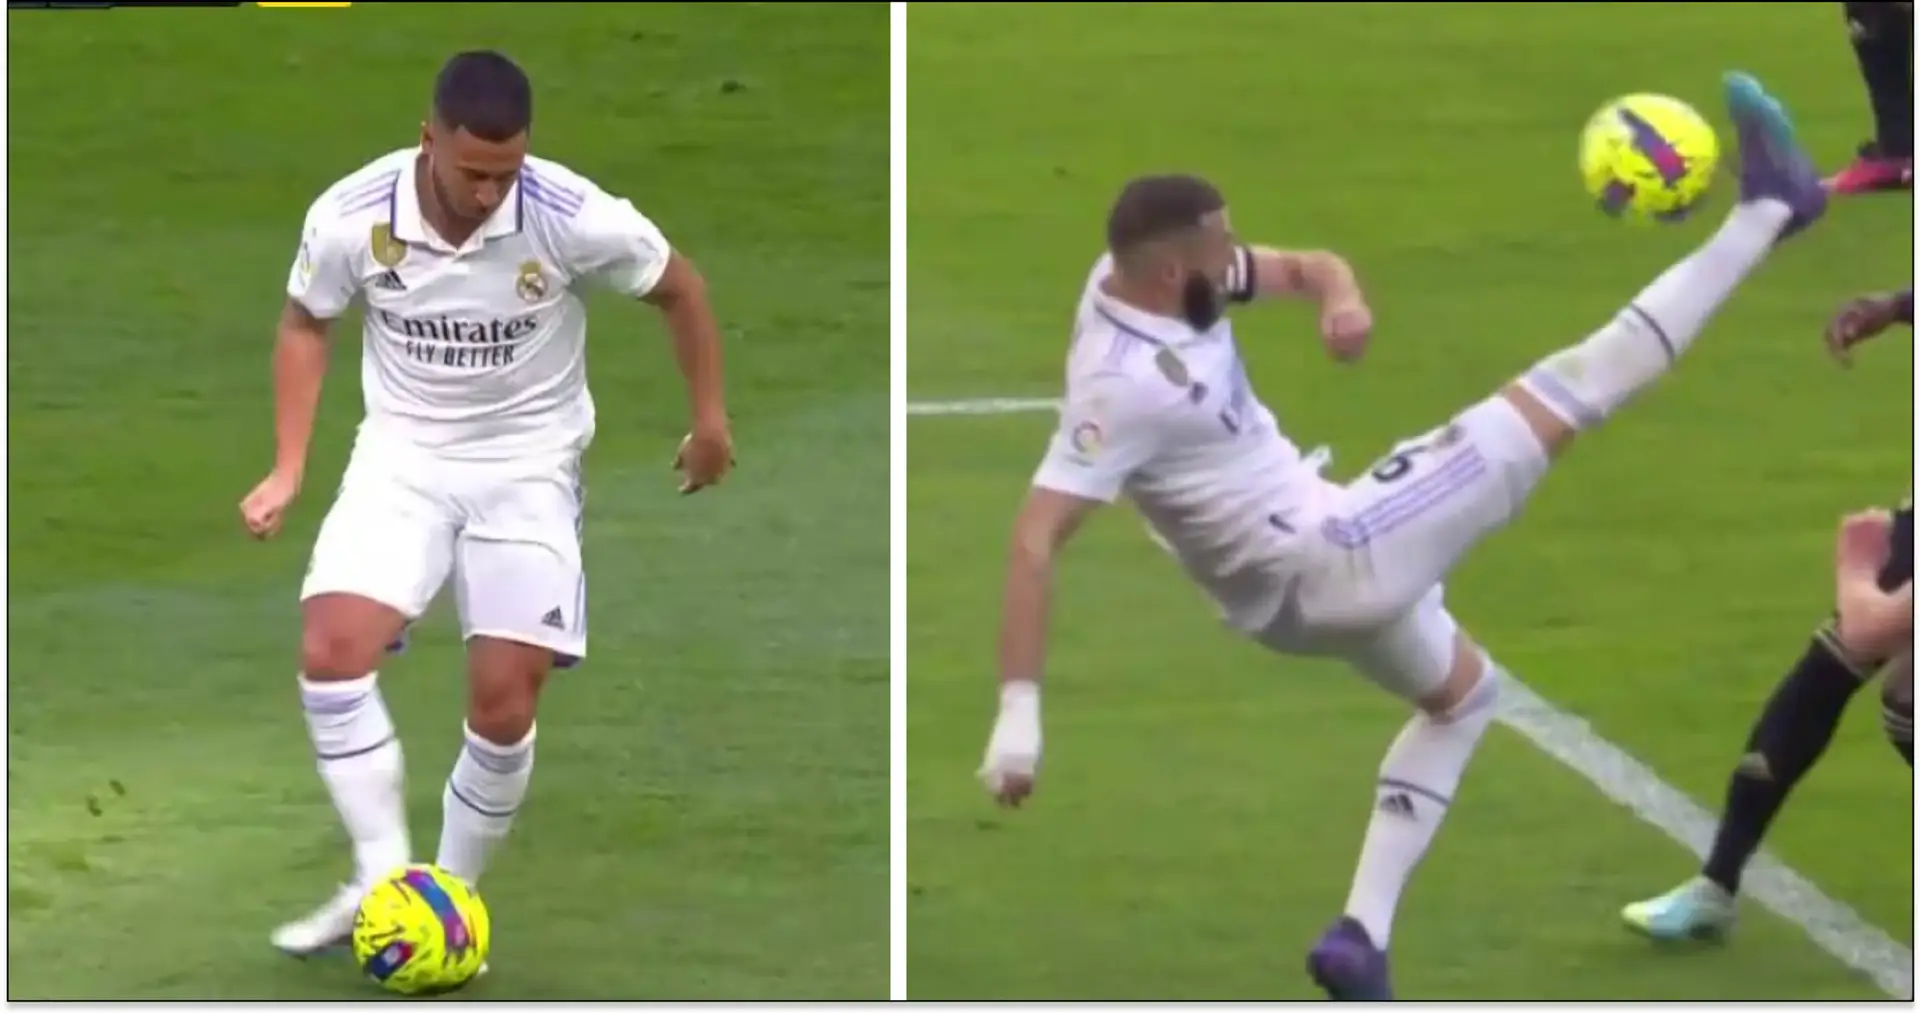 Arbeloa tribute, Hazard's assist & 5 more best images from Valladolid drubbing ahead of El Clasico